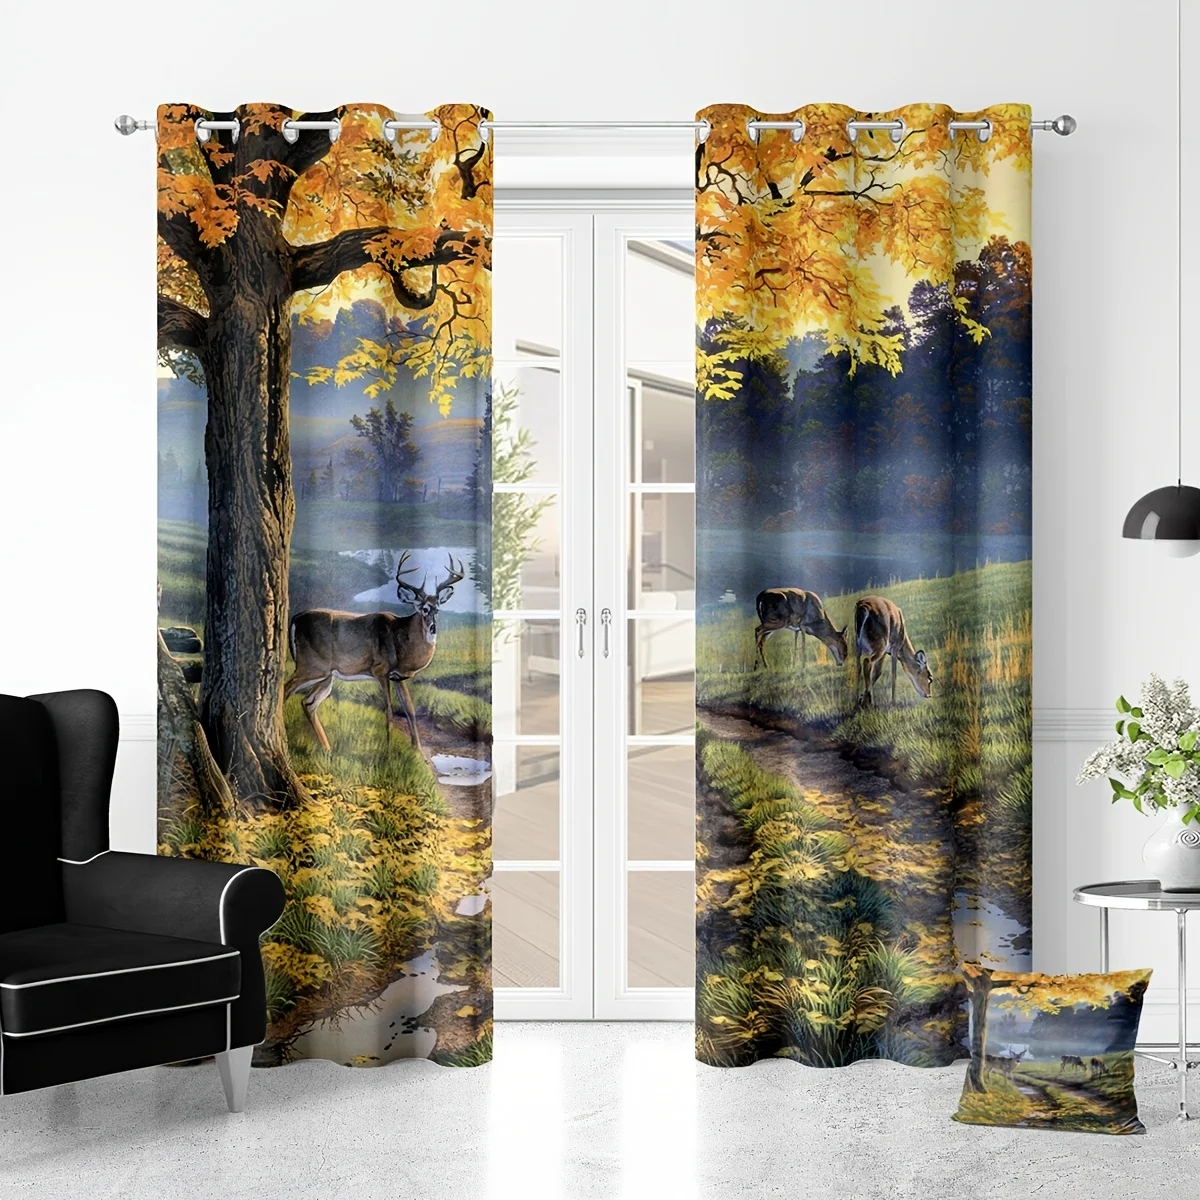 

2pcs Forest Moose Curtains Natural Landscape Blackout Home Decorative Curtains for Bedroom and Living Room Wildlife Lakes Theme